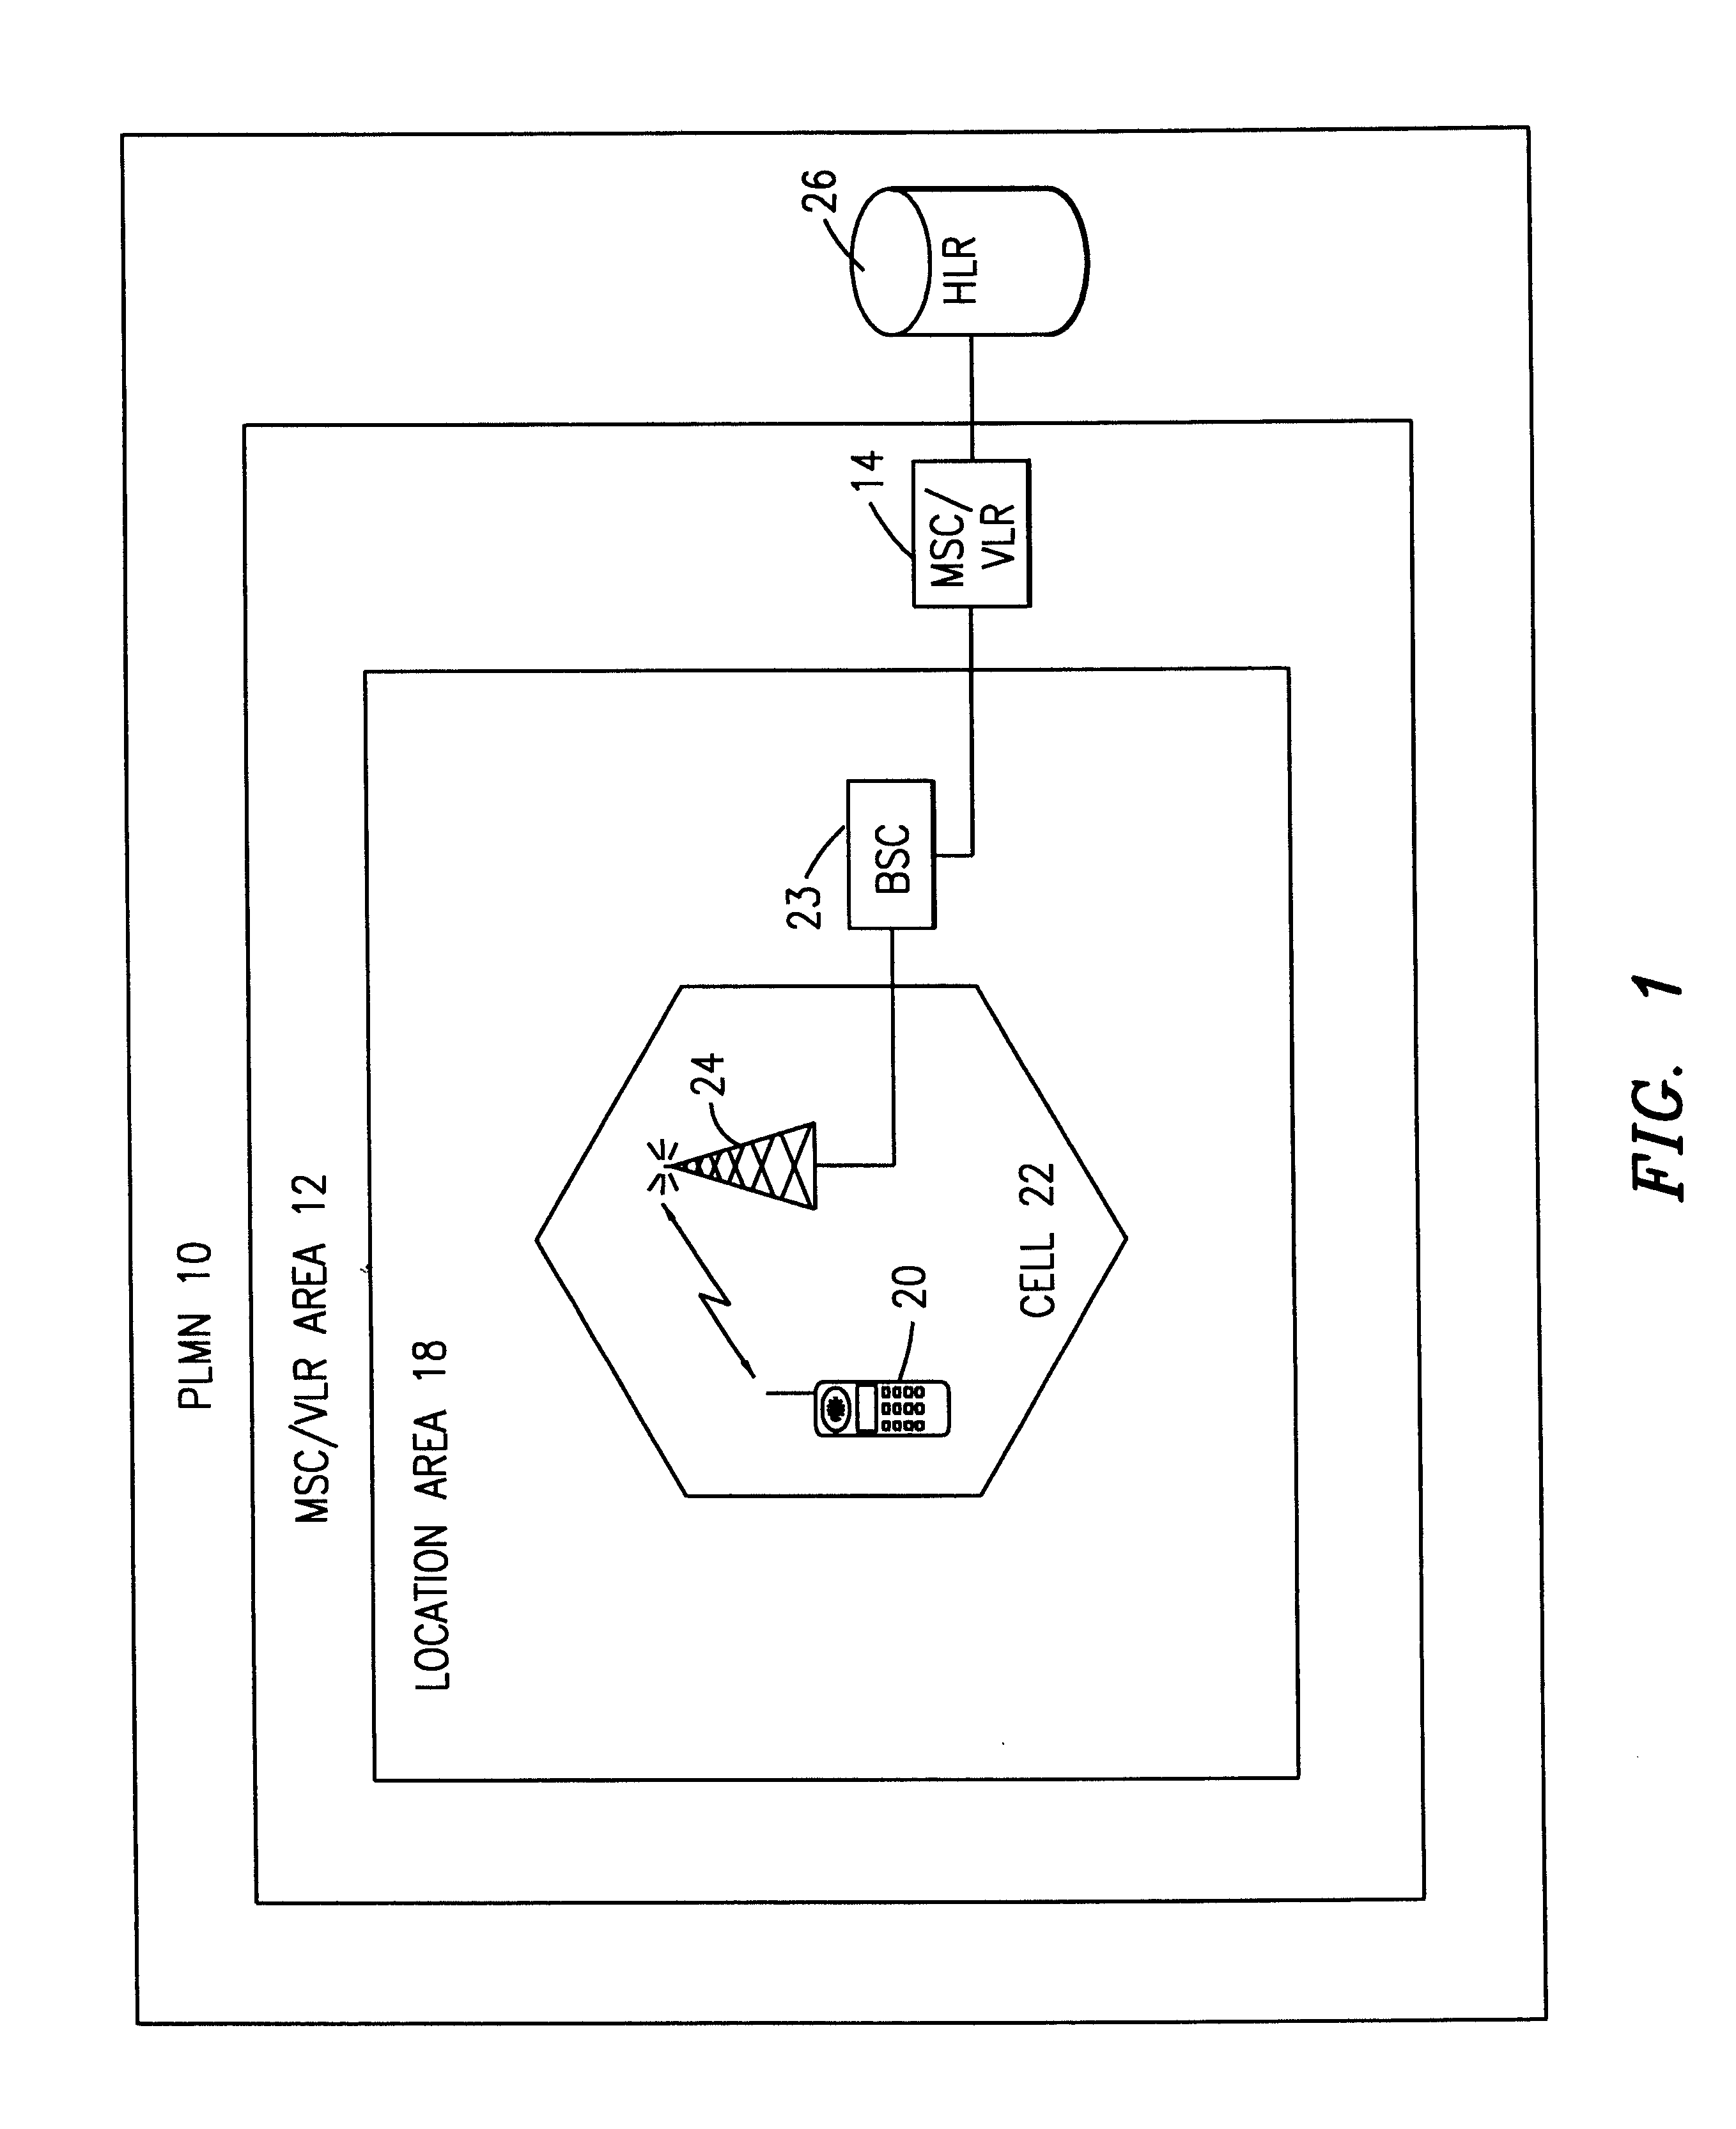 System and method for providing restricting positioning of a target mobile station based on the calculated location estimate